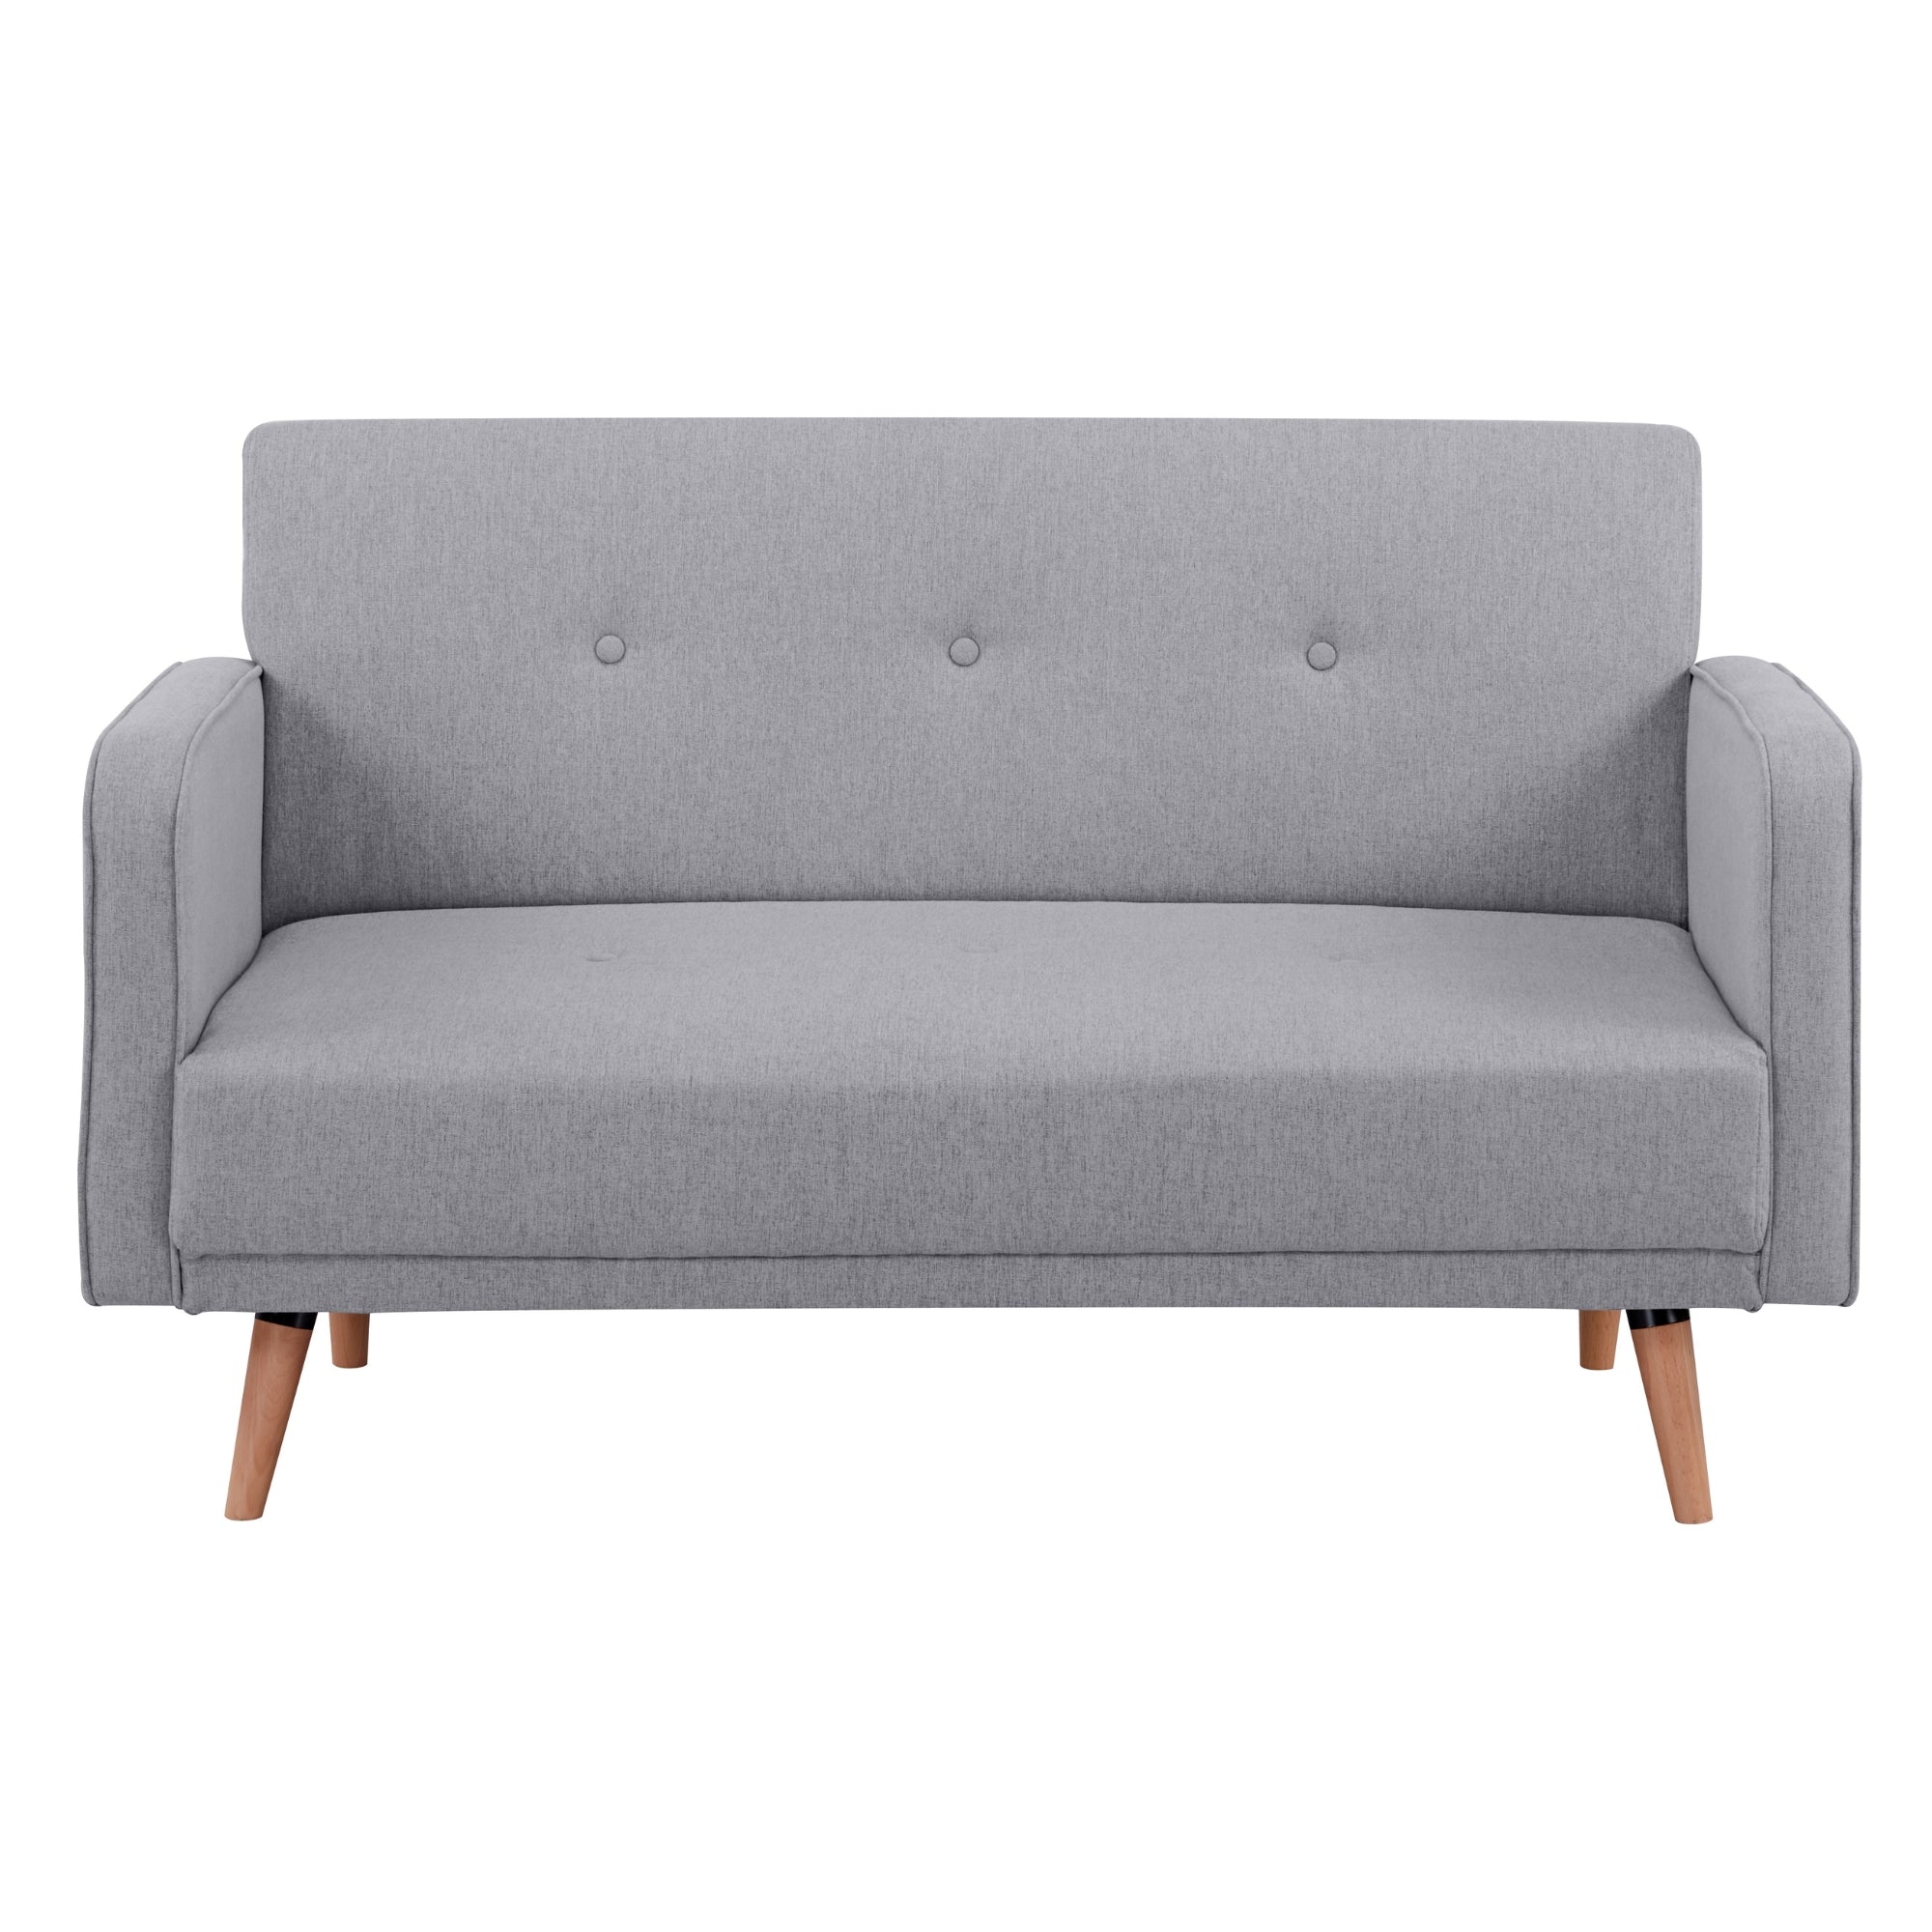 Grey 2-Seater Fabric Sofa with Wood Legs, Foam Support